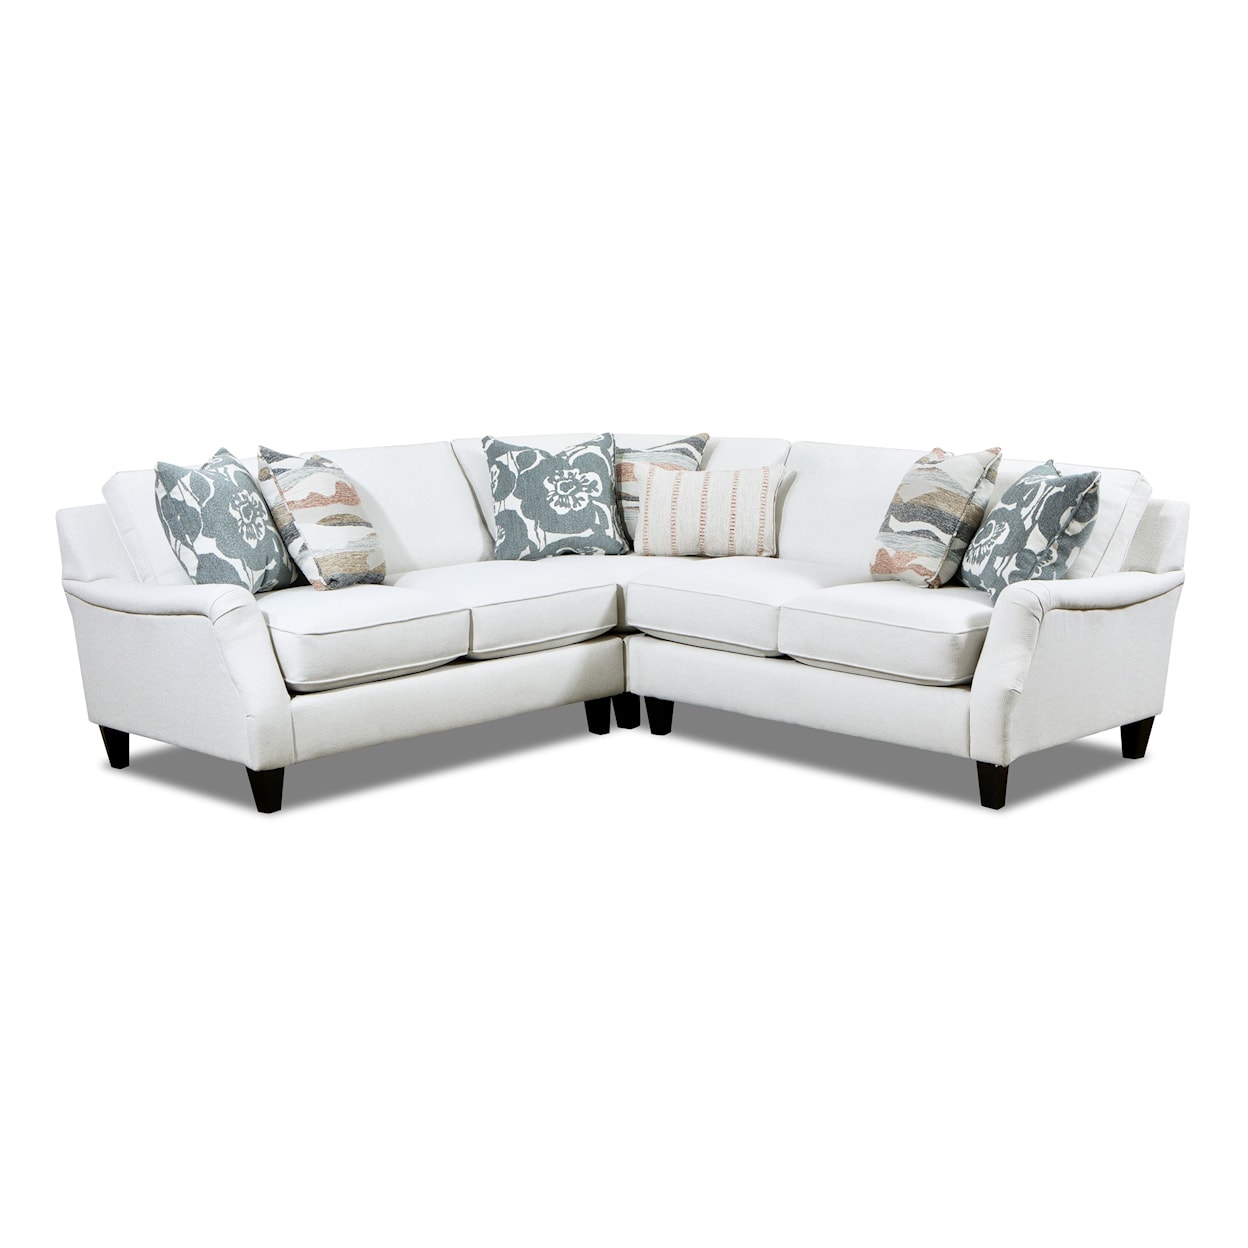 Fusion Furniture 7000 MISSIONARY SALT 3-Piece Sectional